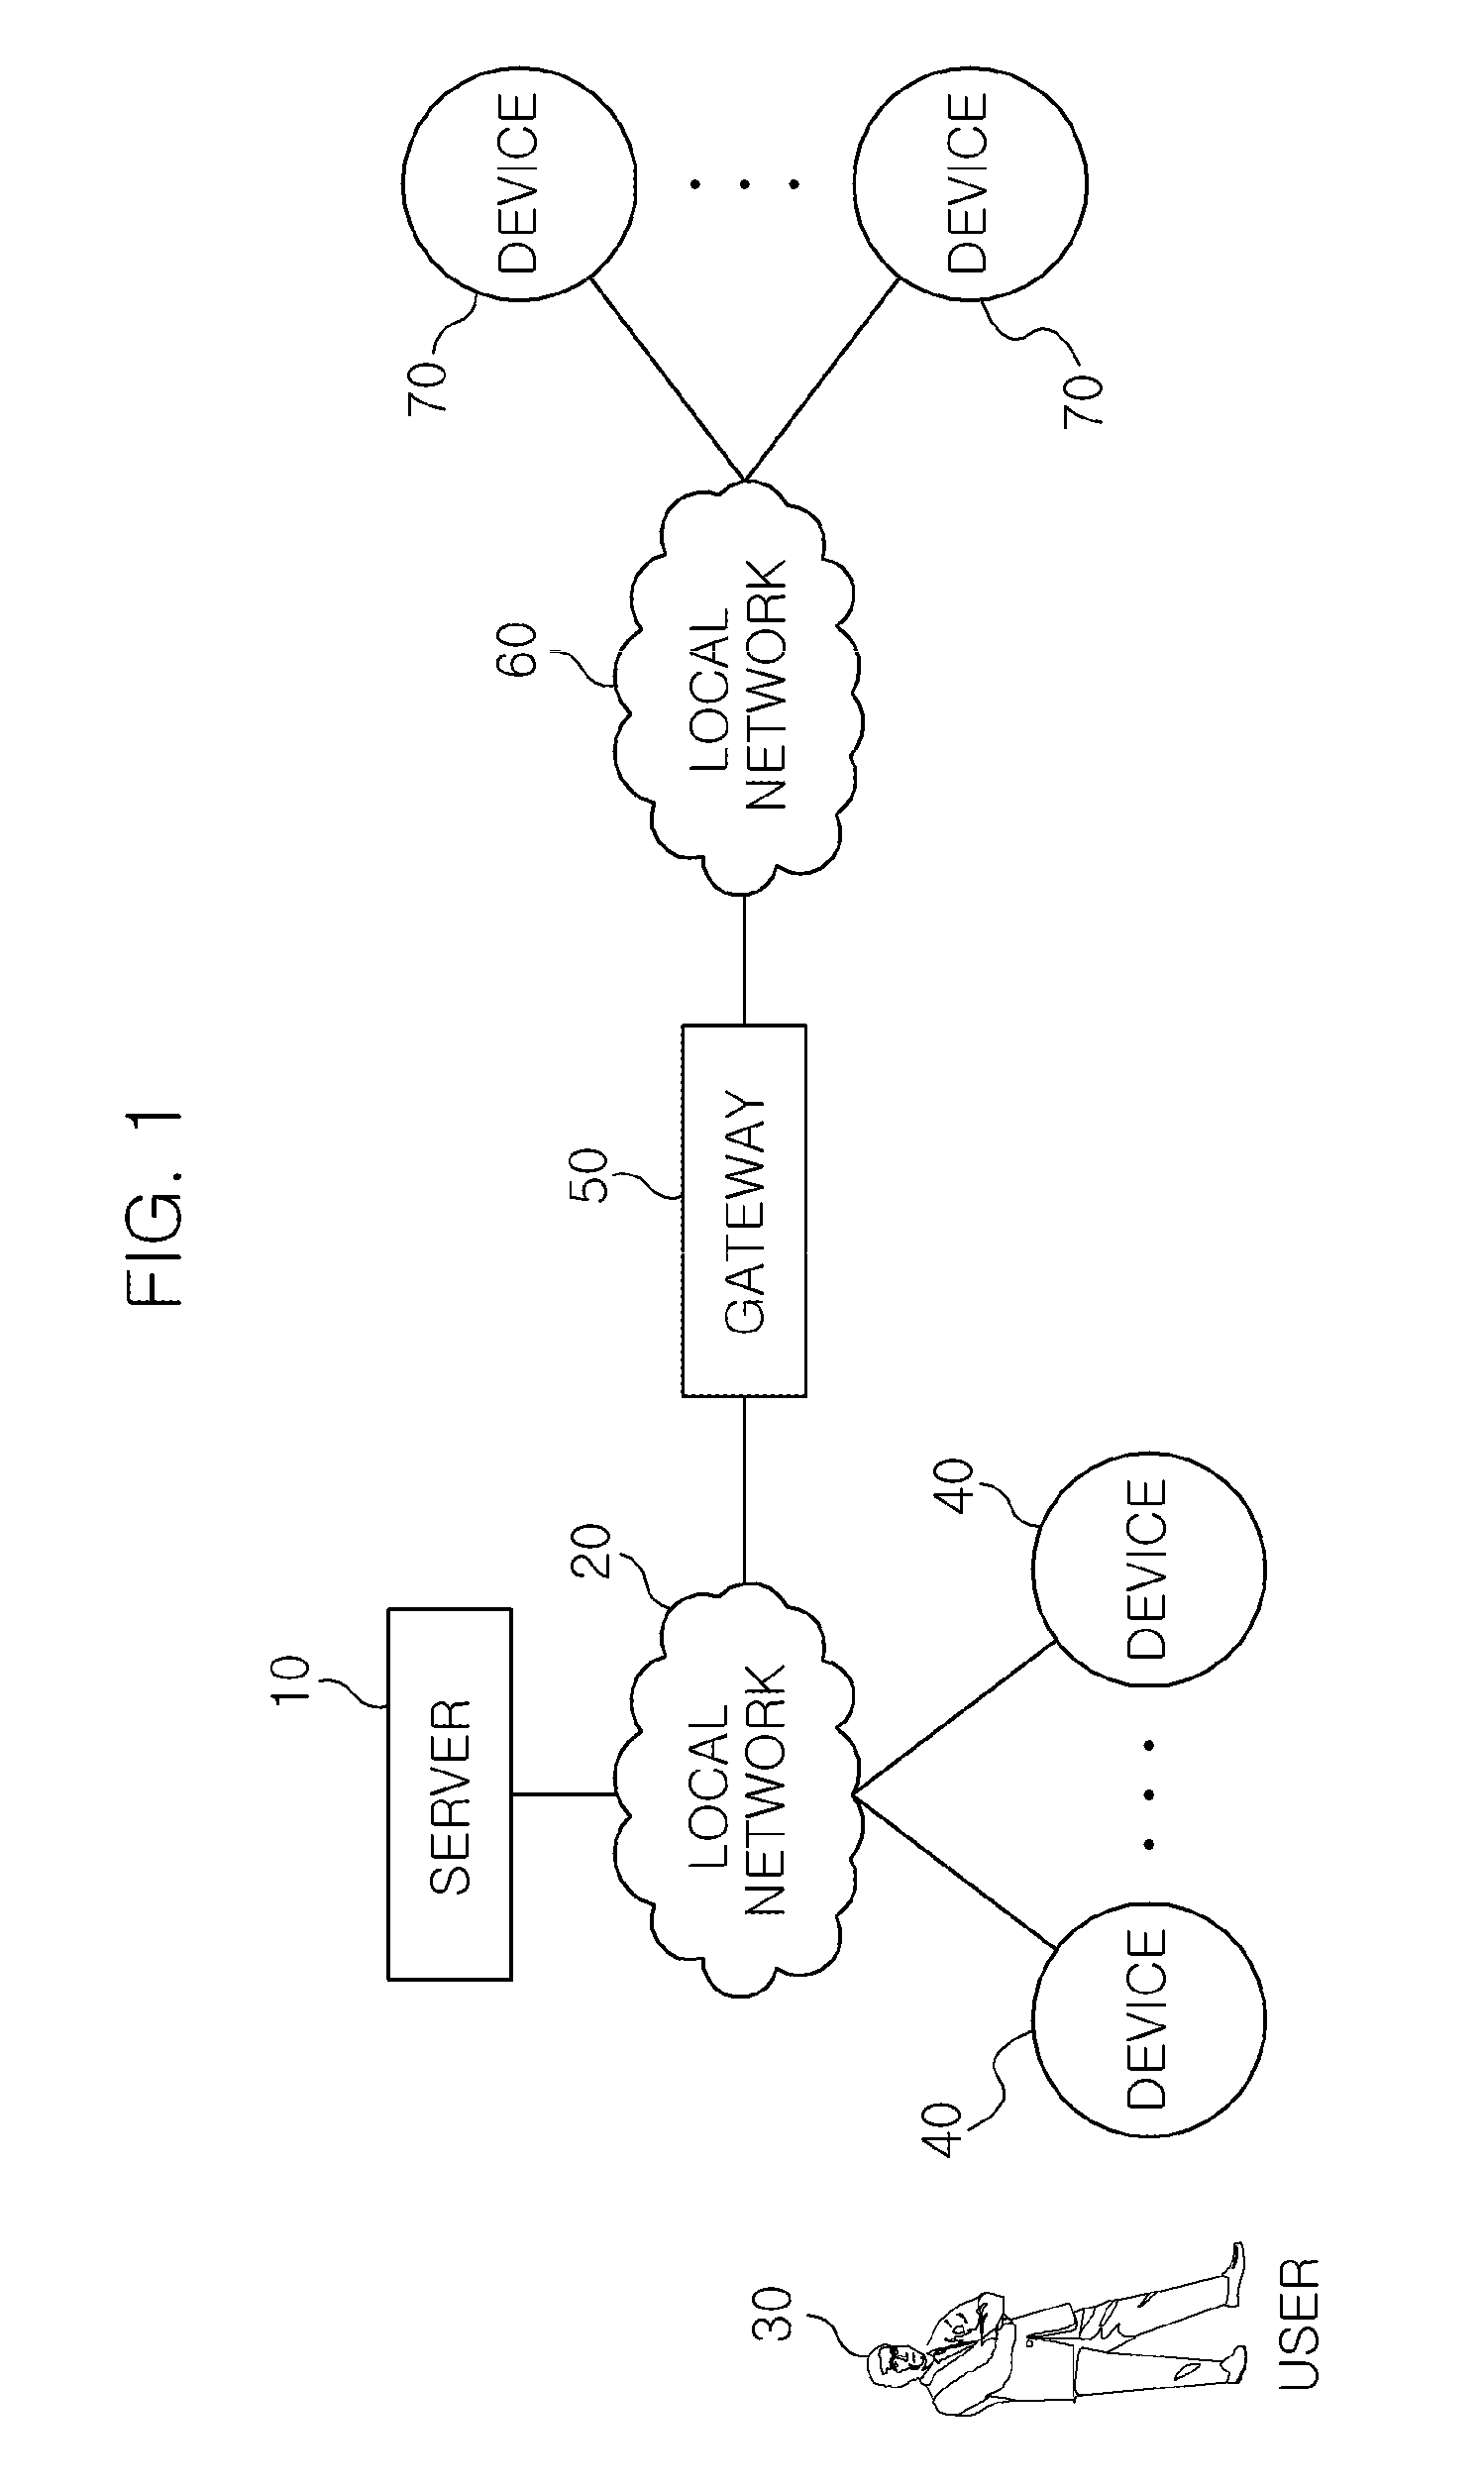 Method and apparatus for physical/logical relationship mapping between resources